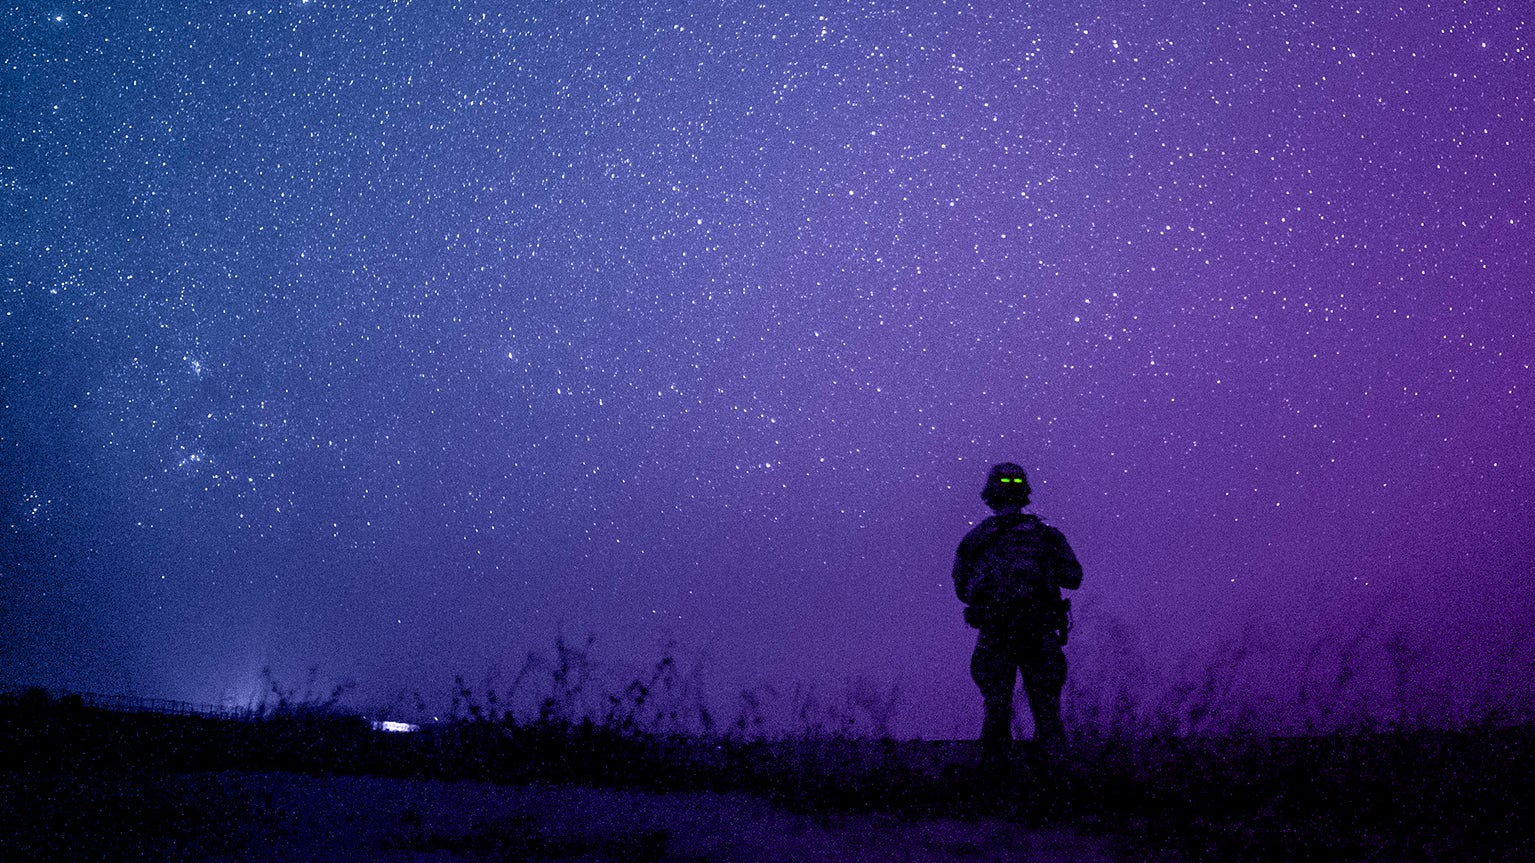 A U.S. Army soldier provides security in Somalia in this color-enhanced photo from June 2020. (Credit: U.S. Air Force/Staff Sgt. Shawn White)